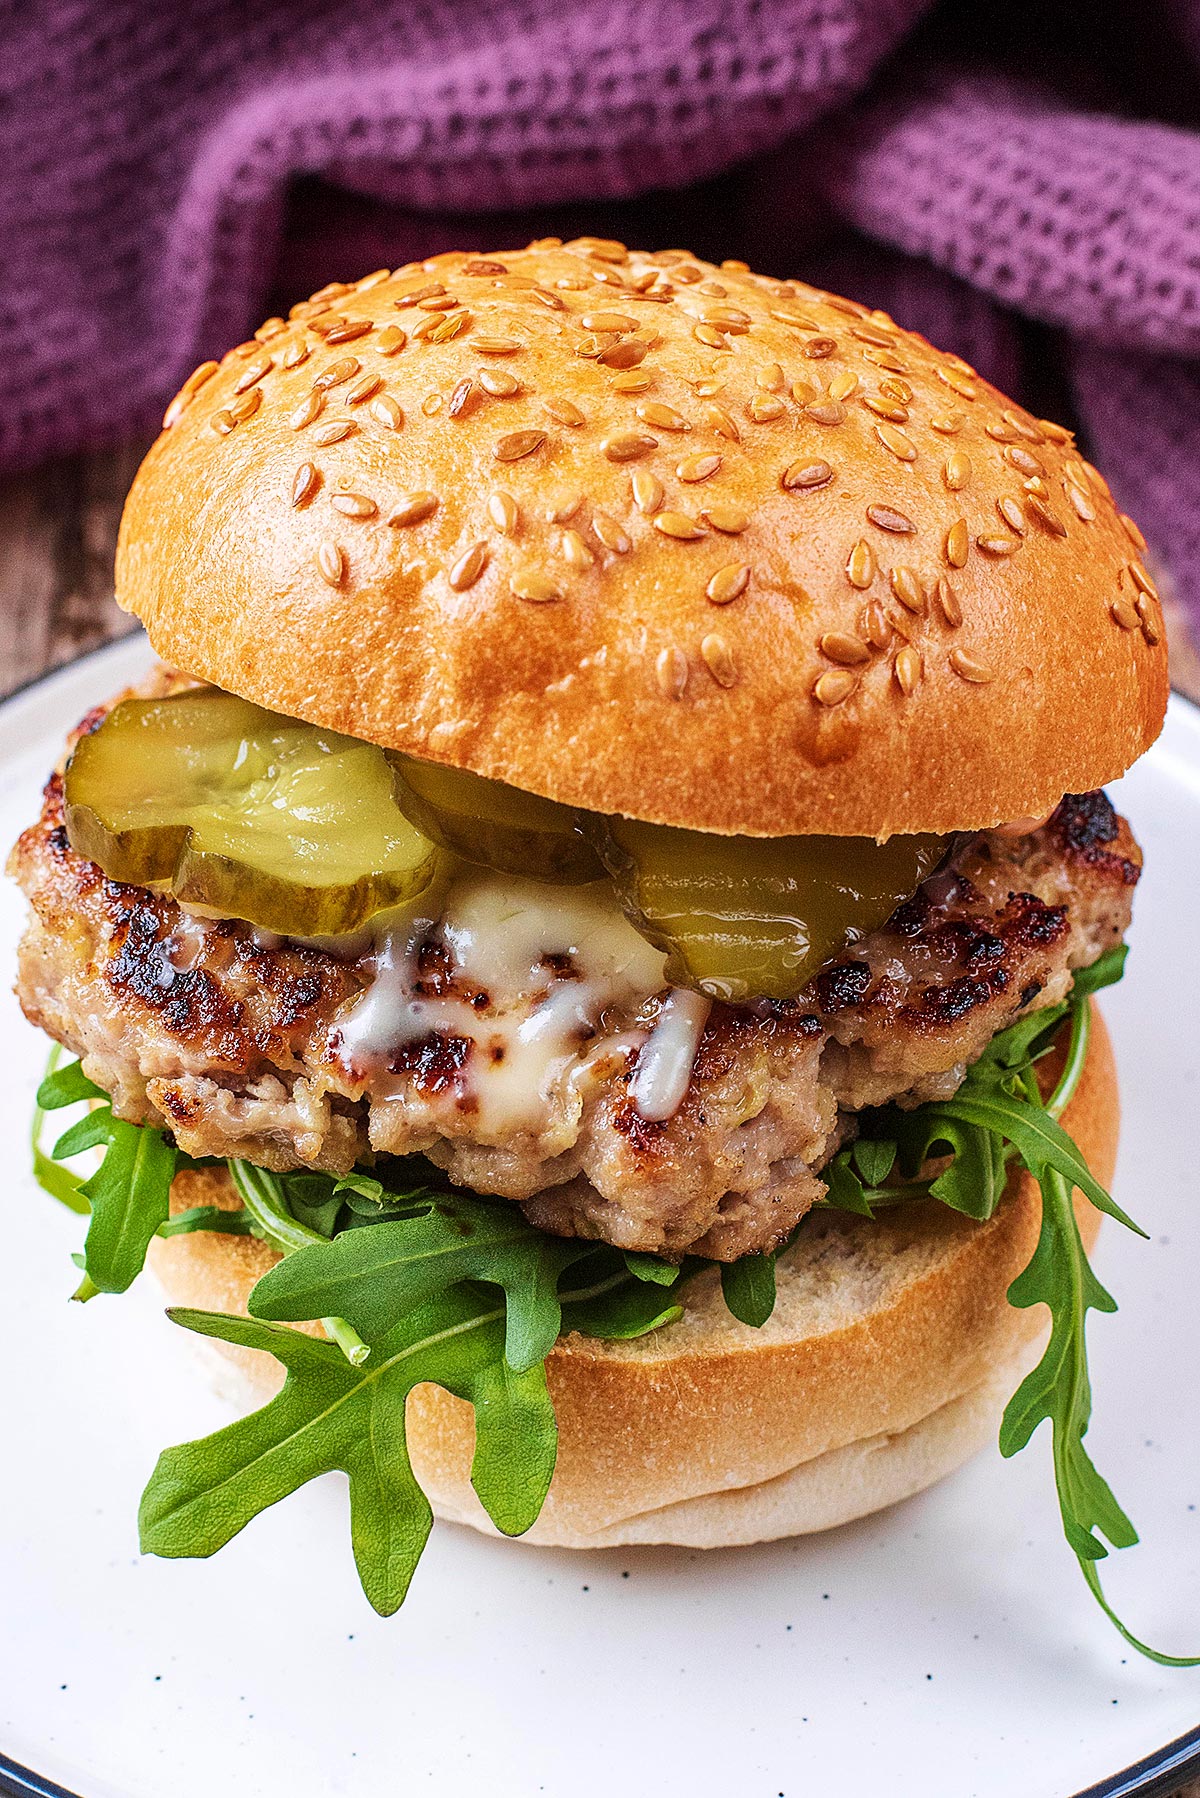 A burger in a sesame seed bun with lettuce leaves, pickles and melted cheese.